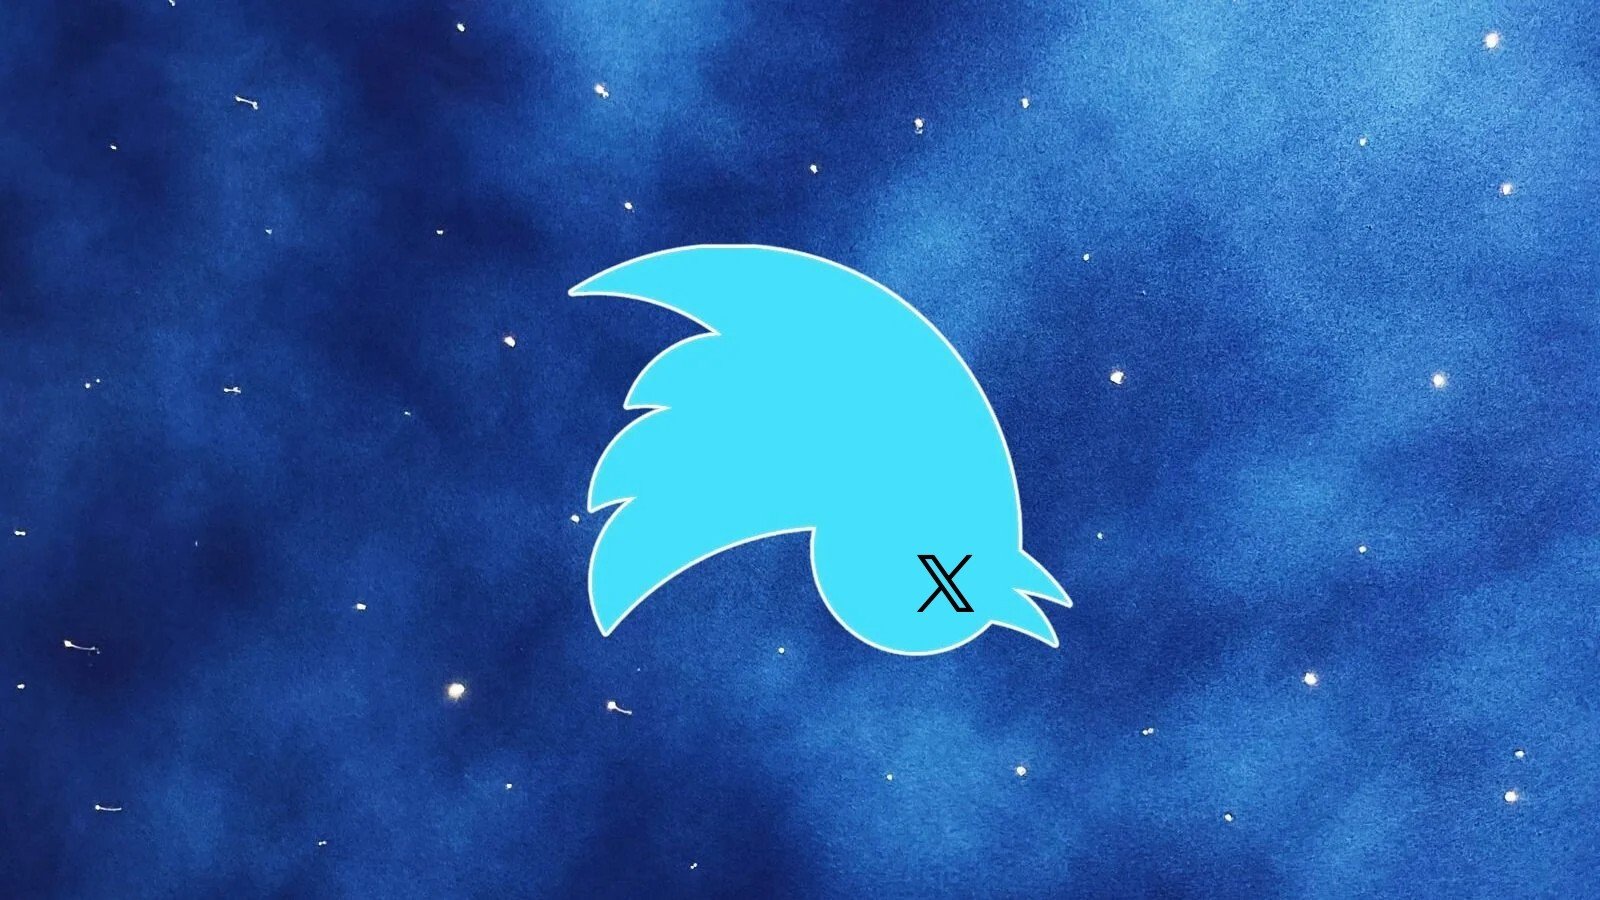 Apple rejects new name ‘X’ for Twitter iOS app because… rules – Source: www.bleepingcomputer.com